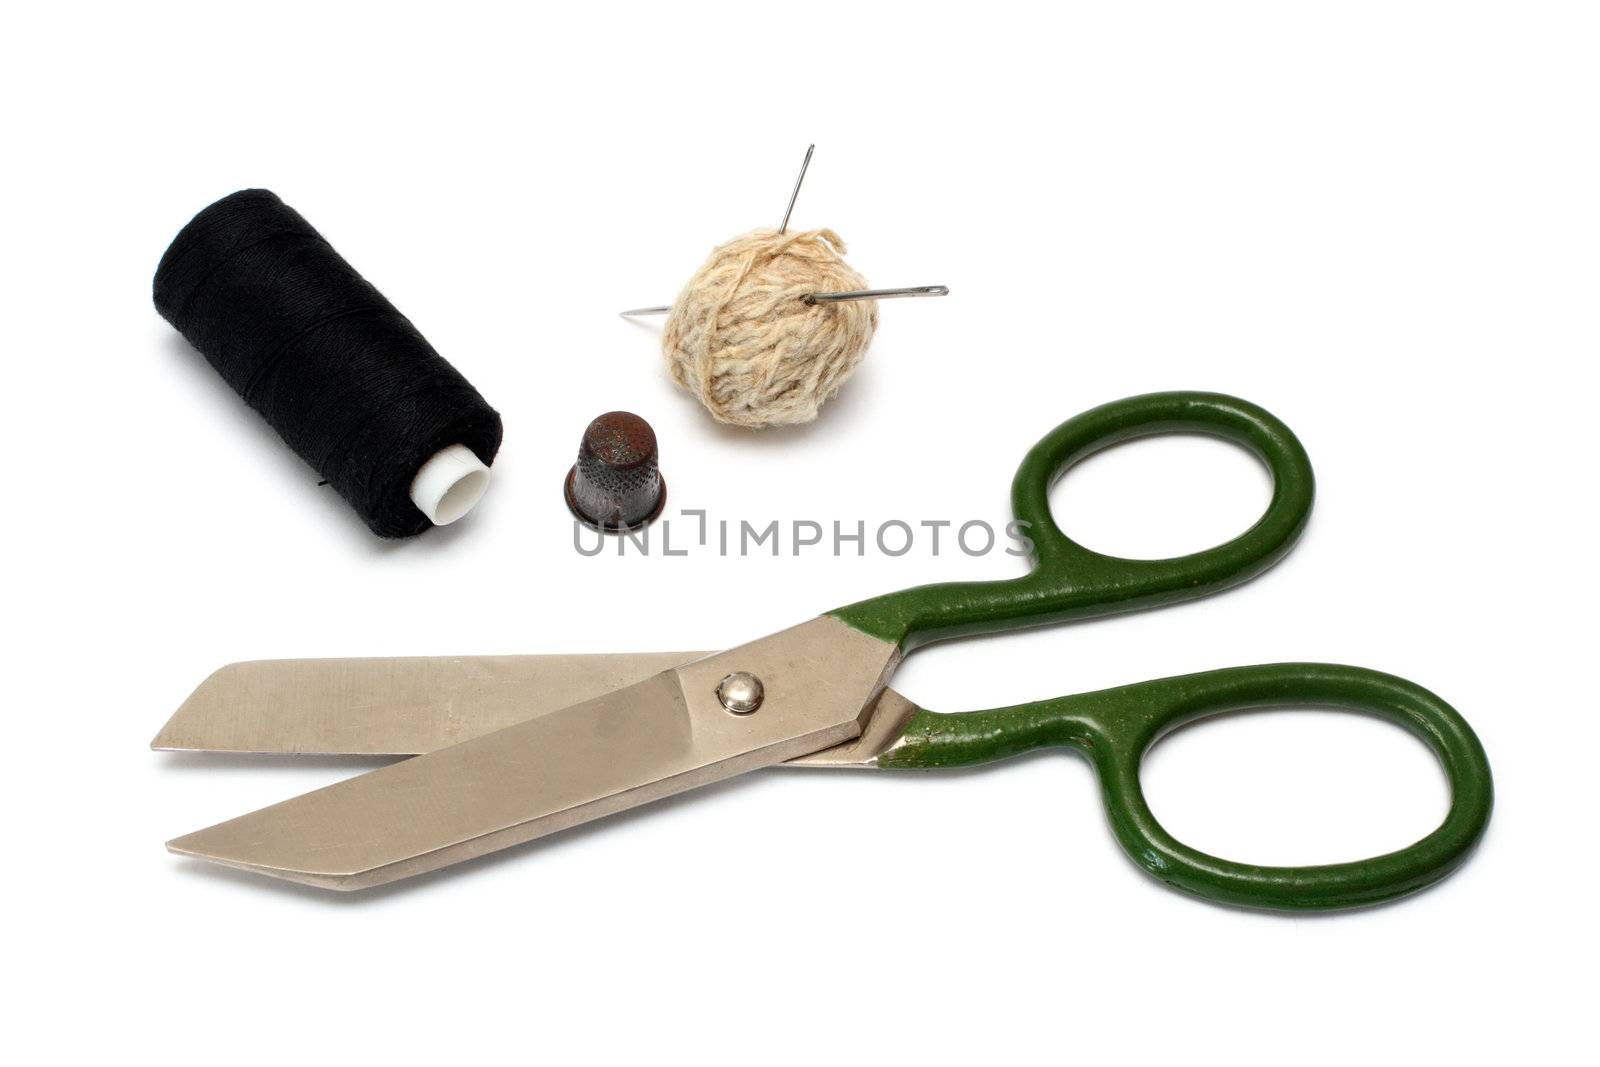 sewing tools by Mikko